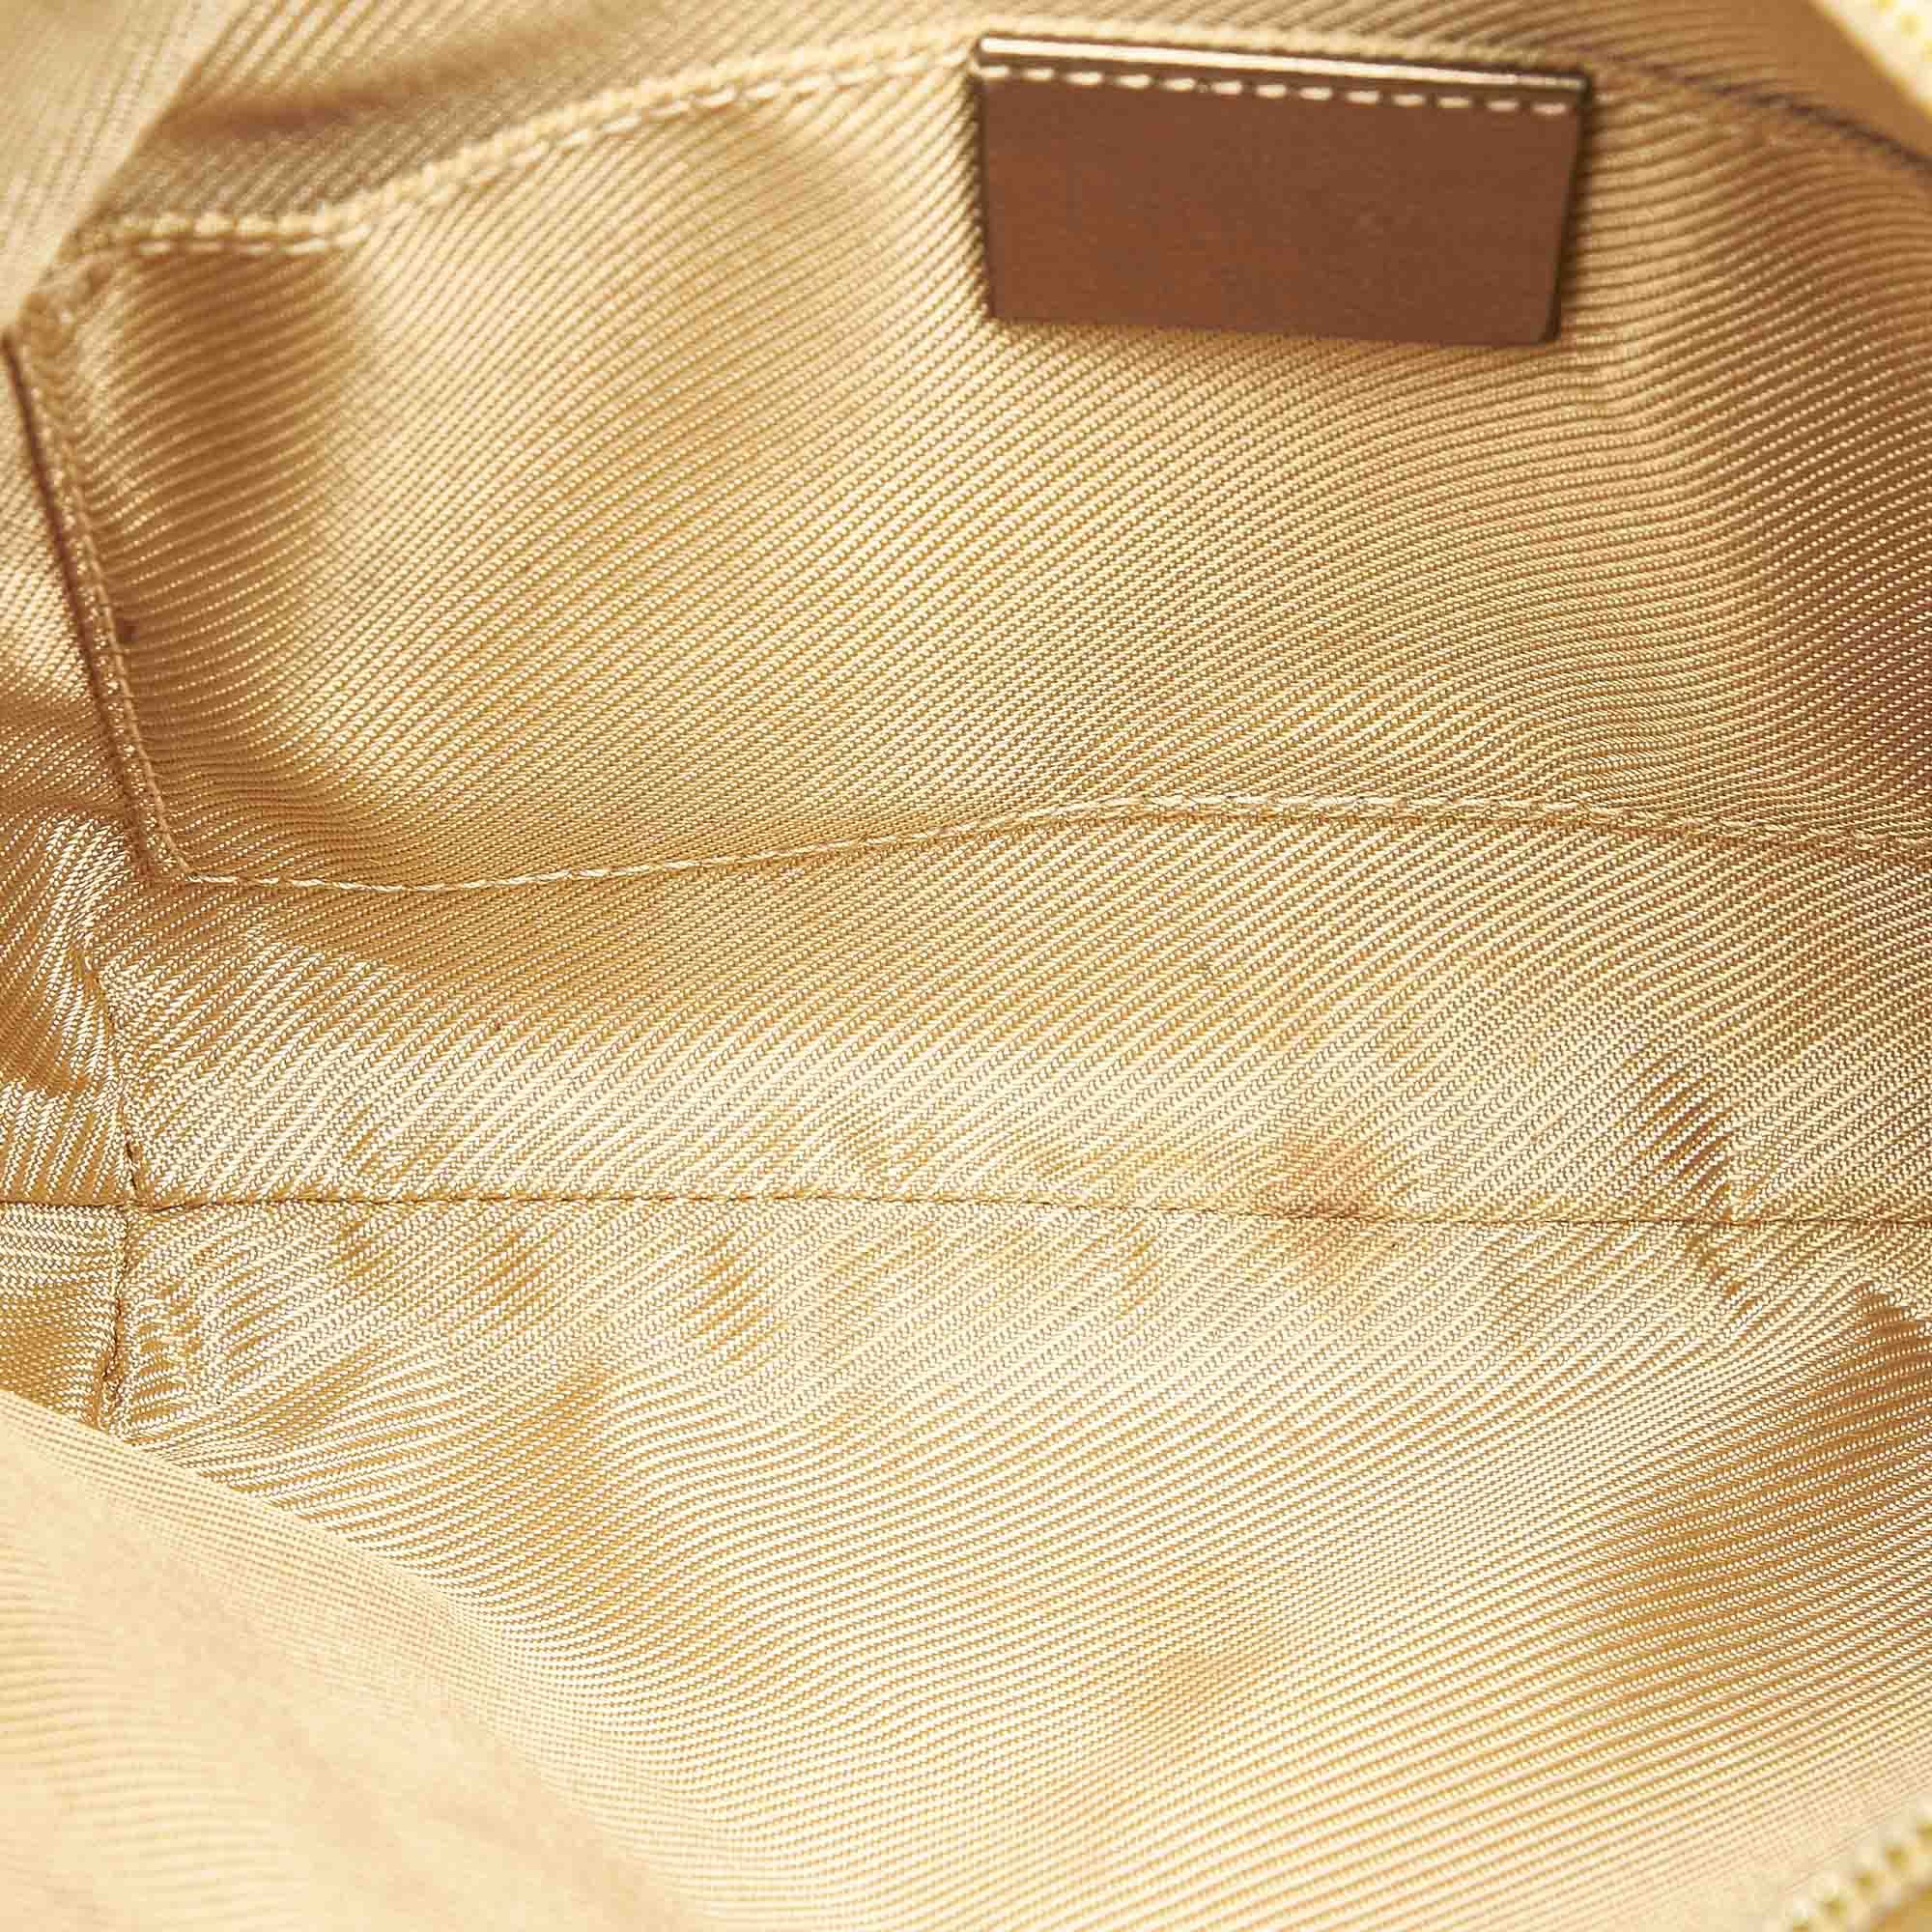 VINTAGE. RRP AS NEW. This shoulder bag features a canvas body, a flat leather strap, a top zip closure, and an interior zip pocket.
Dimensions:
Length 18.5cm
Width 26cm
Depth 1cm
Shoulder Drop 20cm

Original Accessories: This item has no other original accessories.

Color: Gold
Material: Fabric x Canvas x Leather x Calf
Country of Origin: Italy
Boutique Reference: SSU96257K1342


Product Rating: GoodCondition